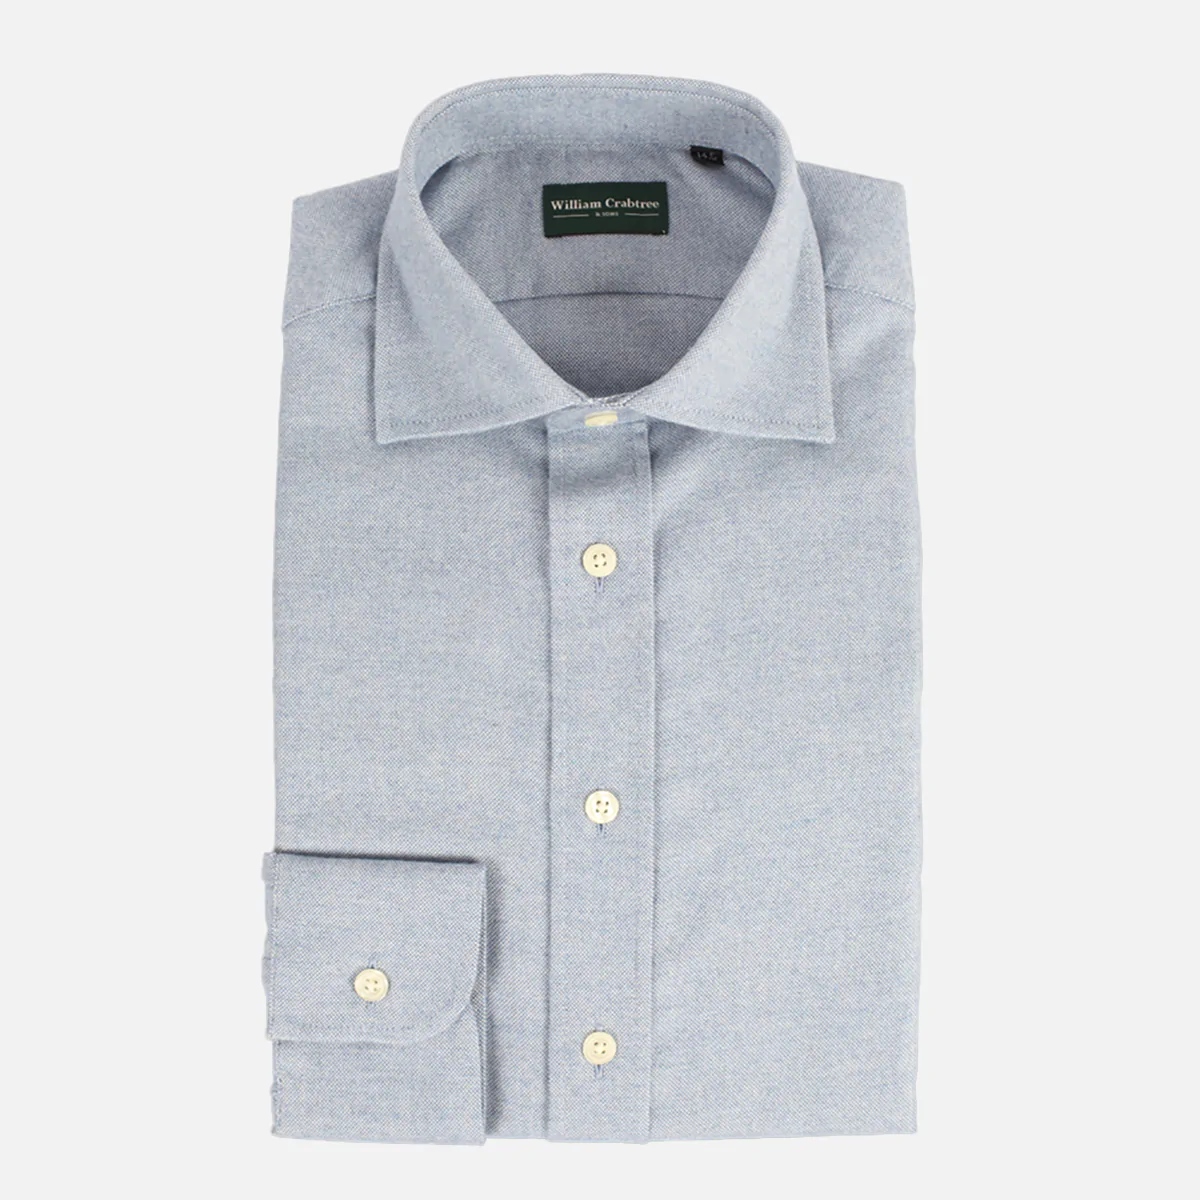 Brushed Cotton Semi Spread Collared Shirt